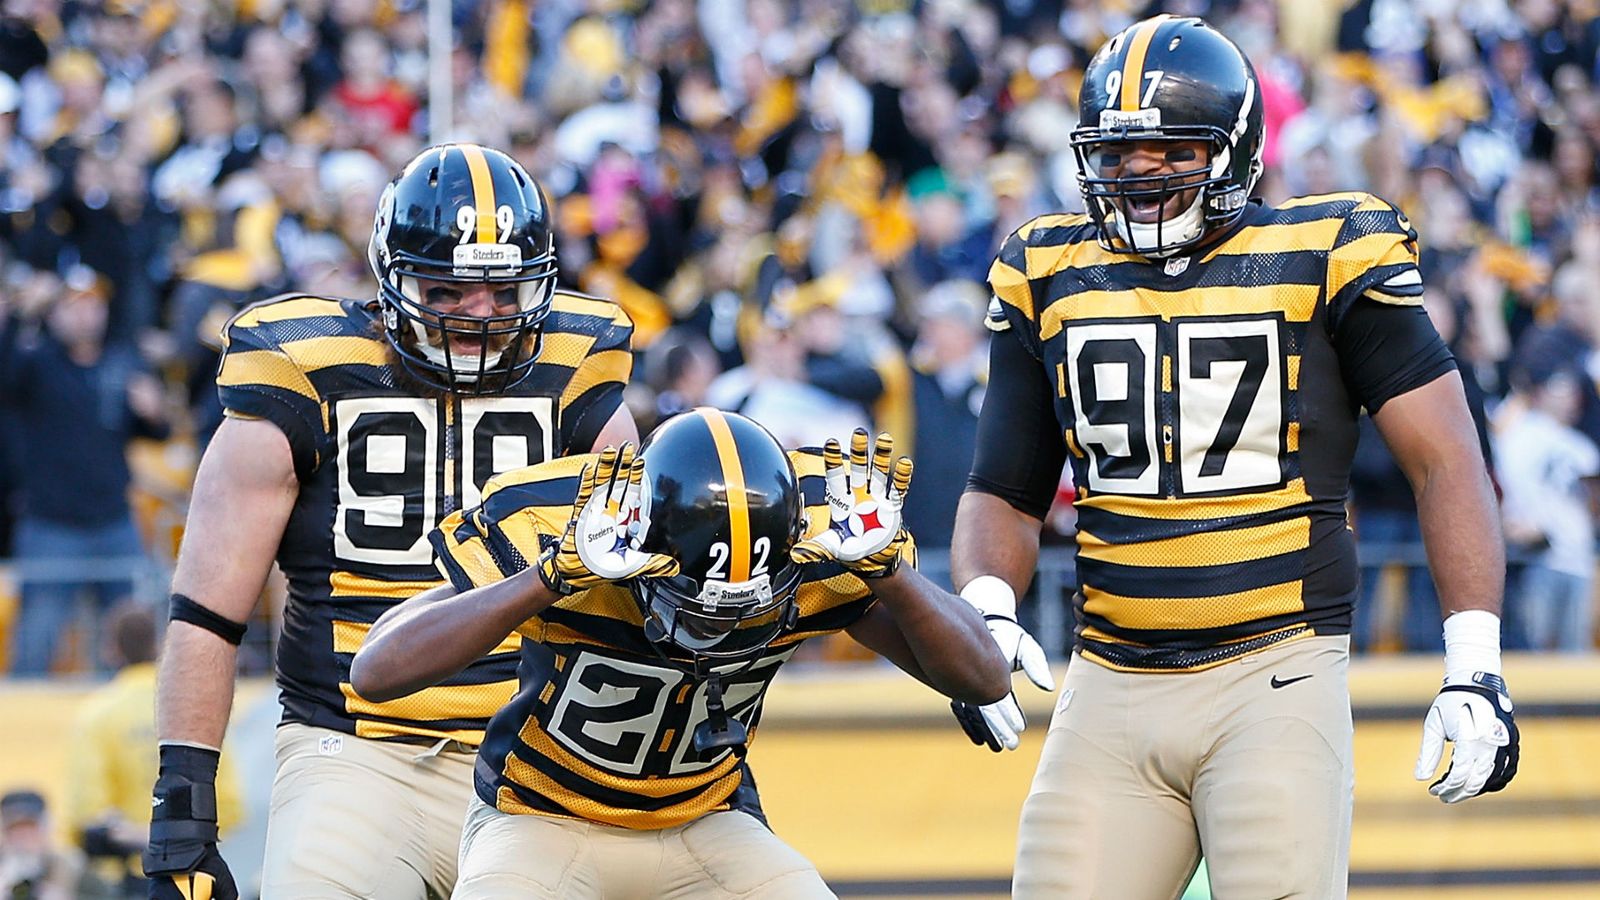 What Steelers Throwback Jersey Should They Bring Back?